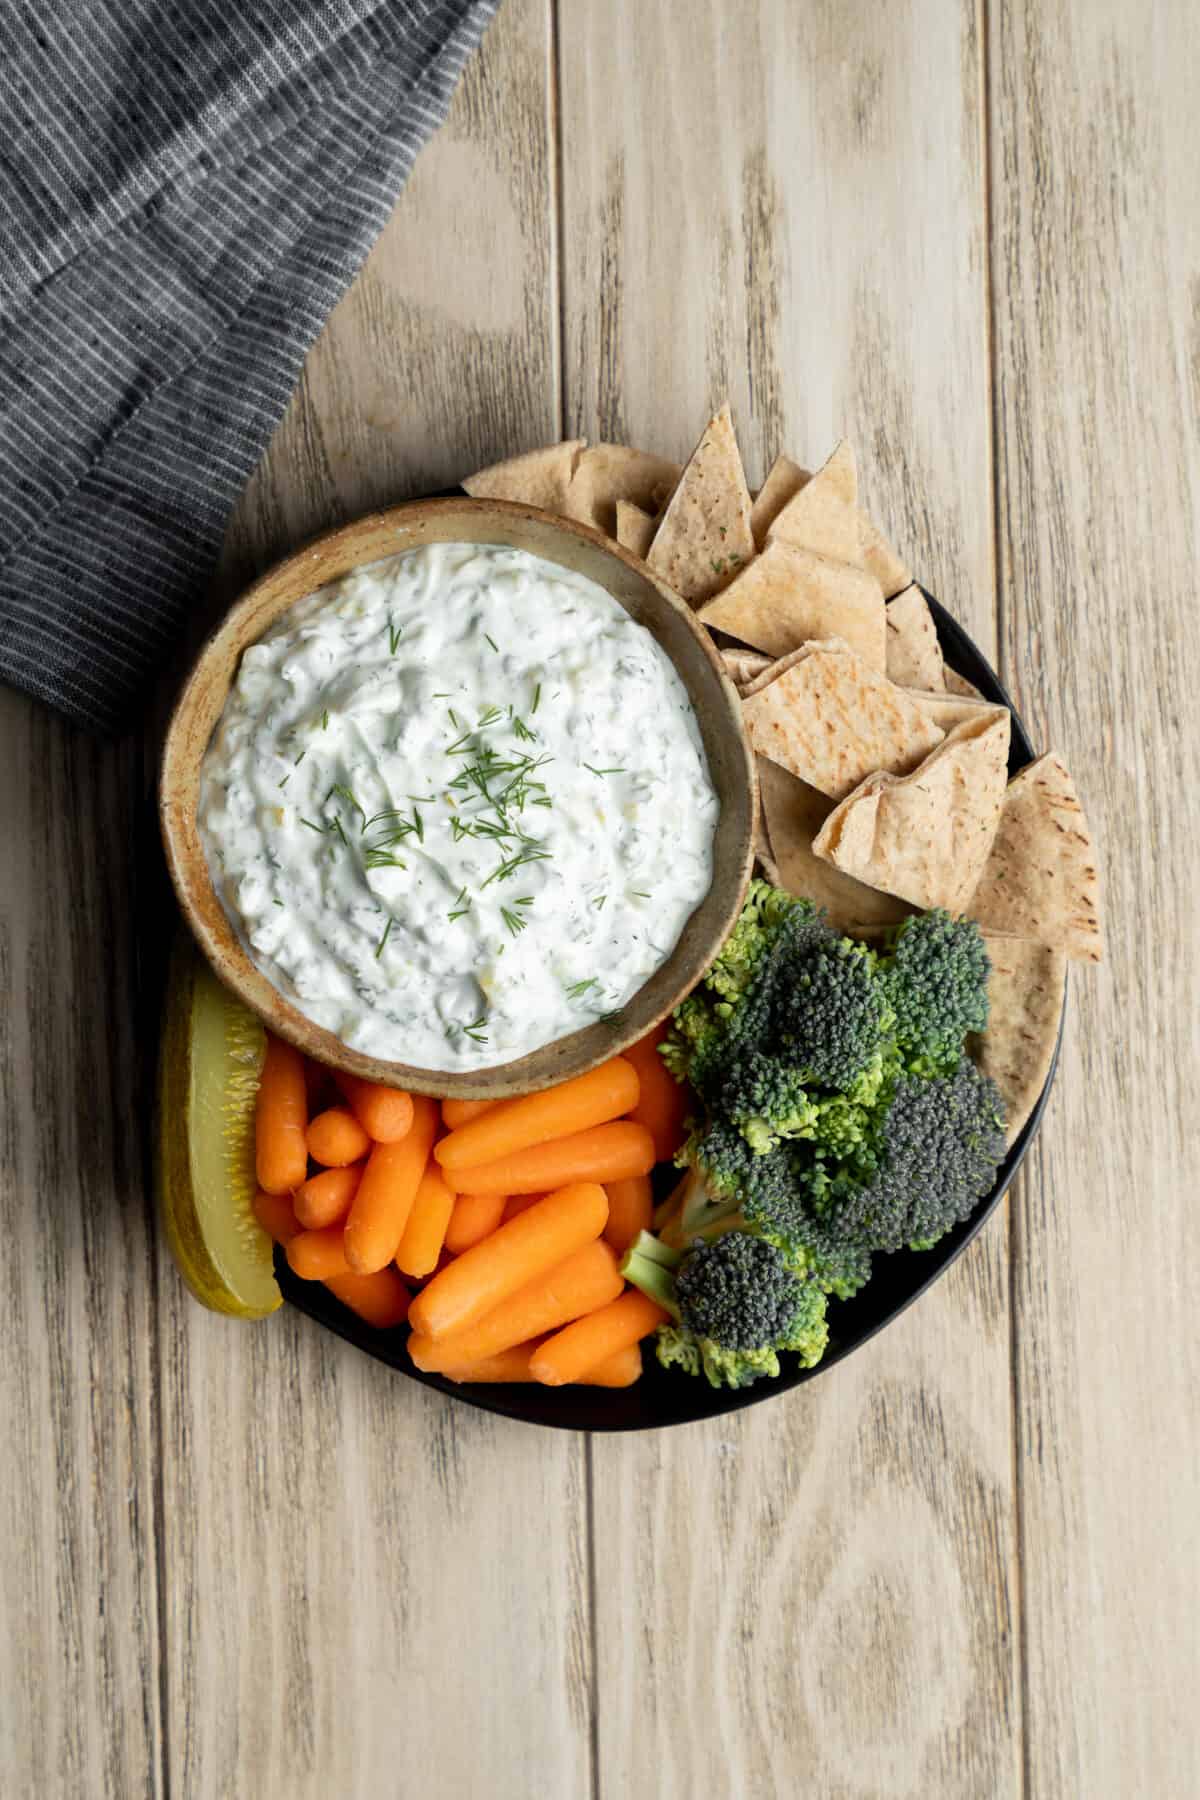 Bowl of dill pickle dip with bread and vegetables for dipping.